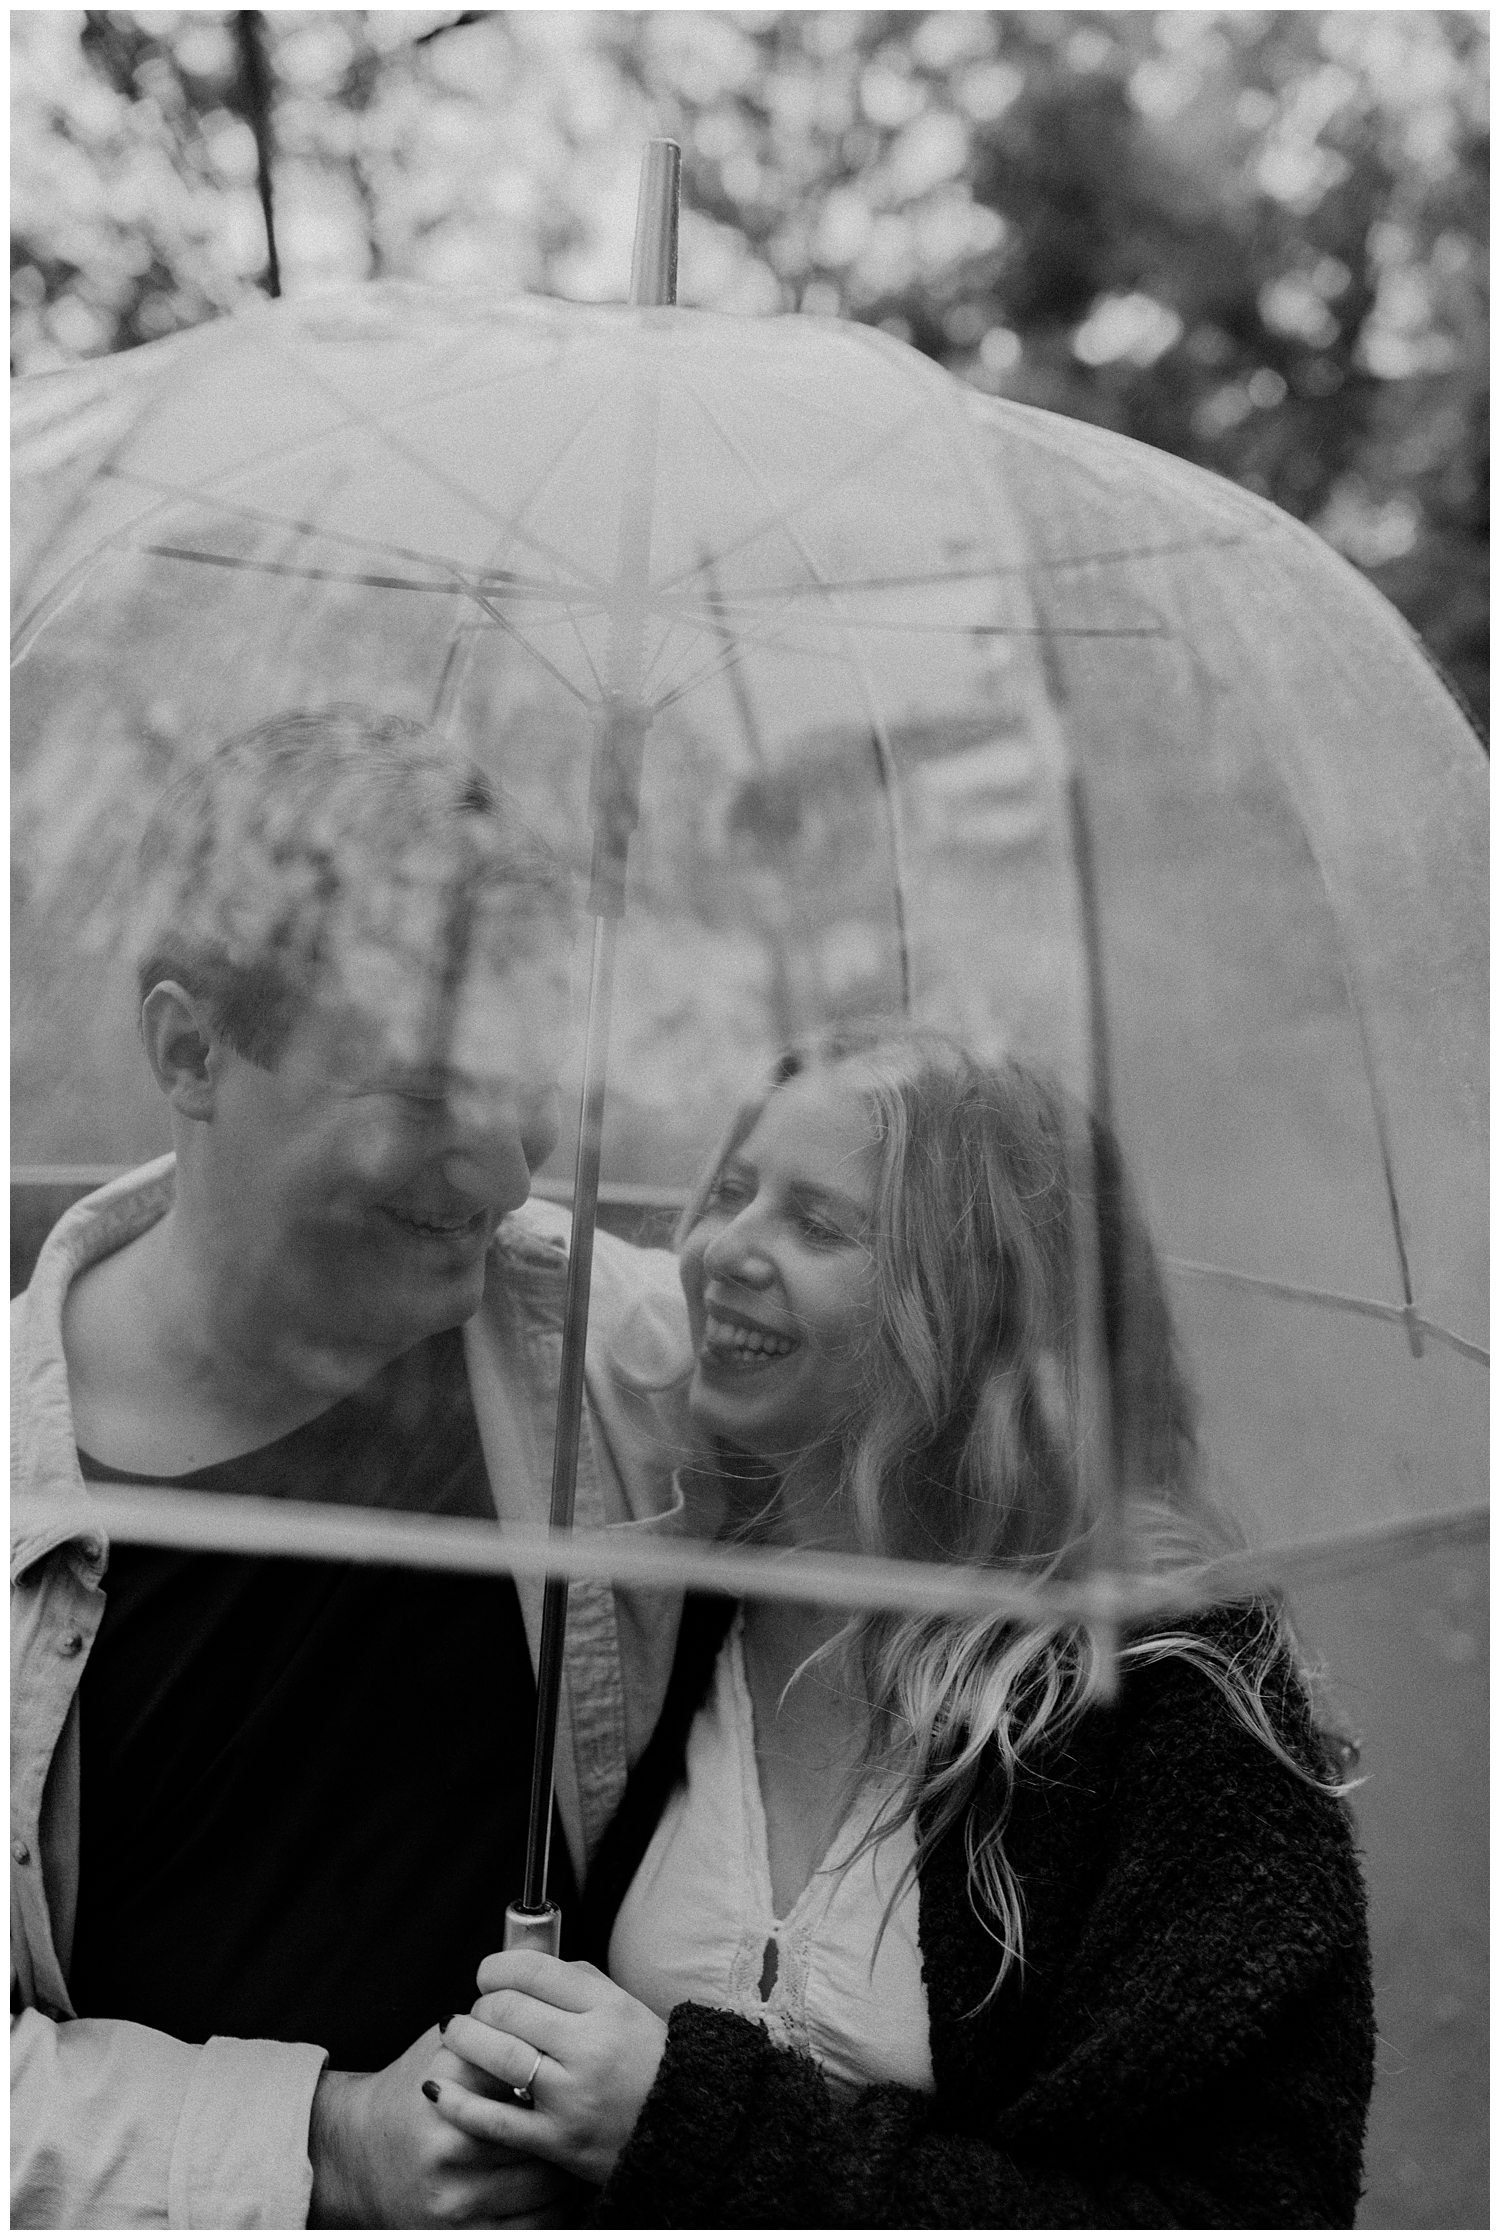 Rainy Day Engagement Session in Marietta, Georgia with cute couple laughing in the rain under a clear umbrella